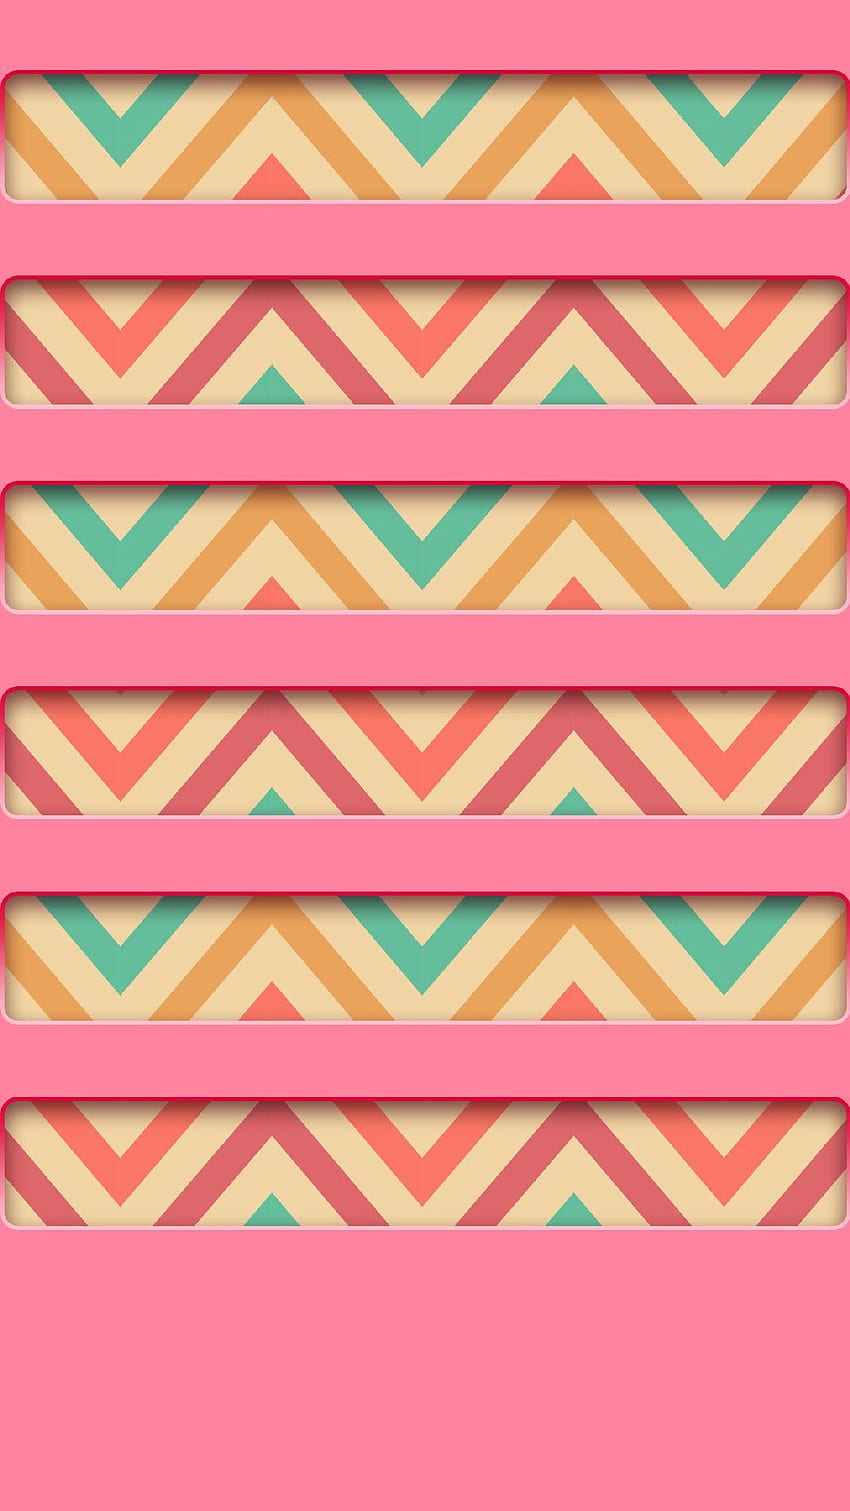 Flower Patterns Girly And App On Pinterest Shelves Colorful Zigzag Stripes Pink Pattern Cool. lloyd ... HD phone wallpaper